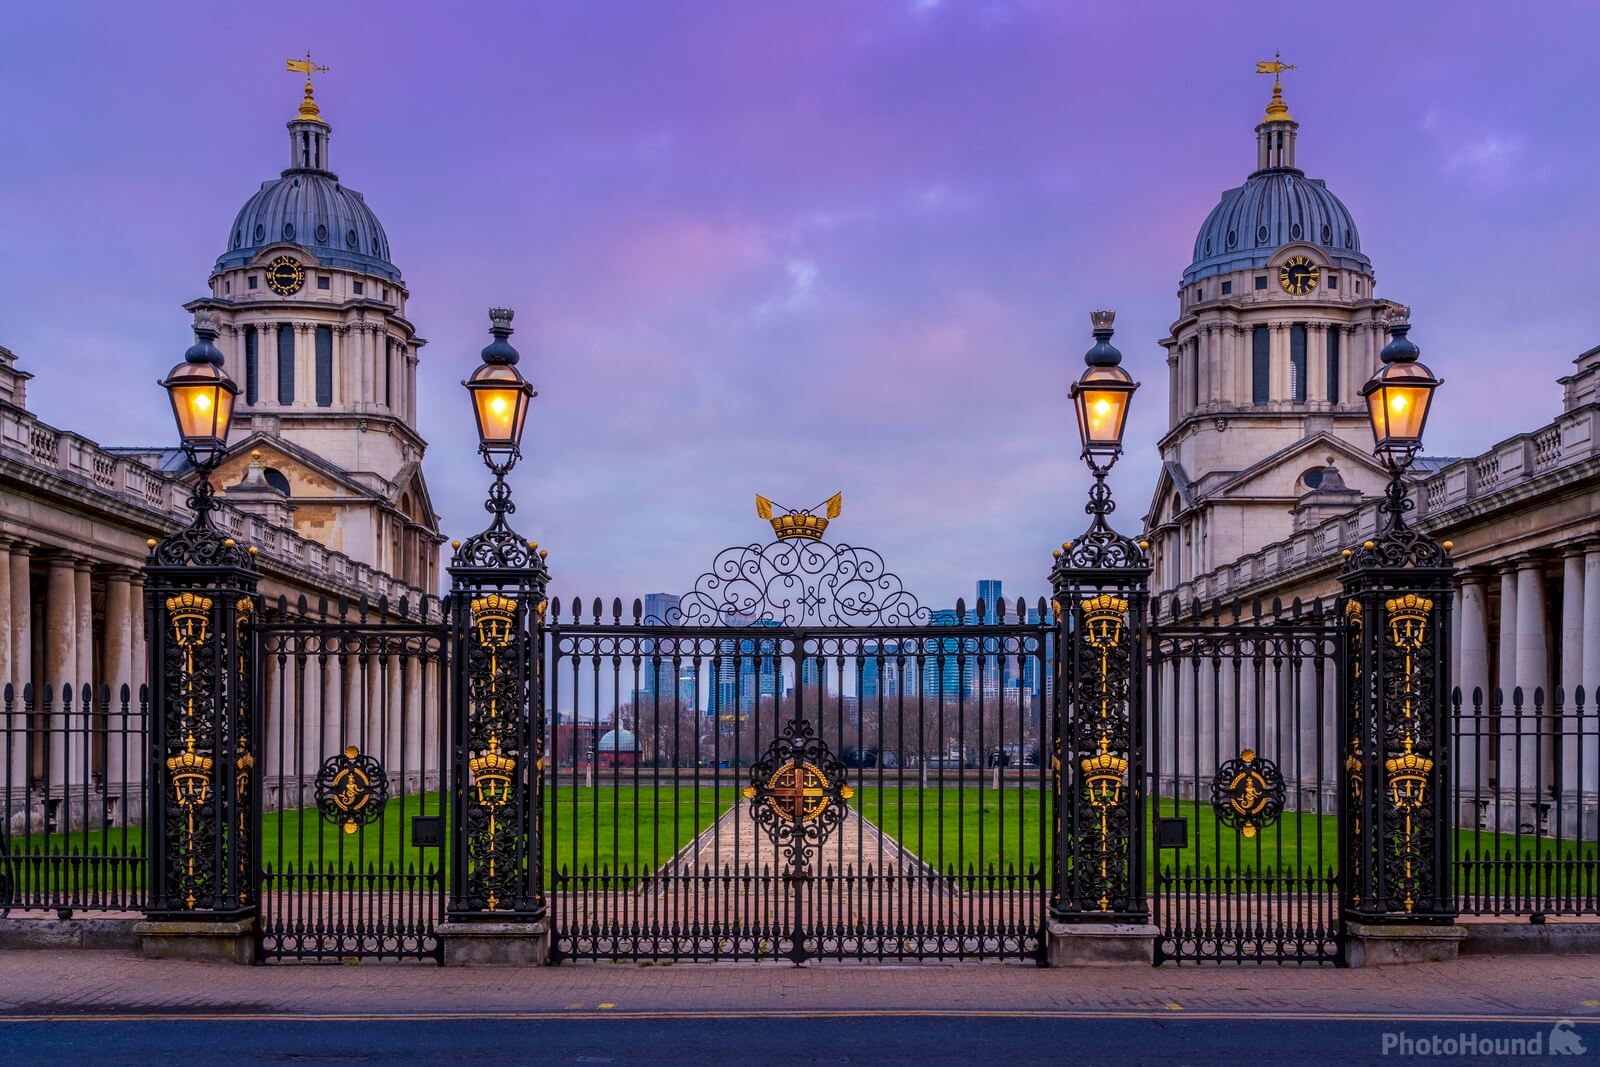 Image of The Old Royal Naval College, Greenwich by Doug Stratton